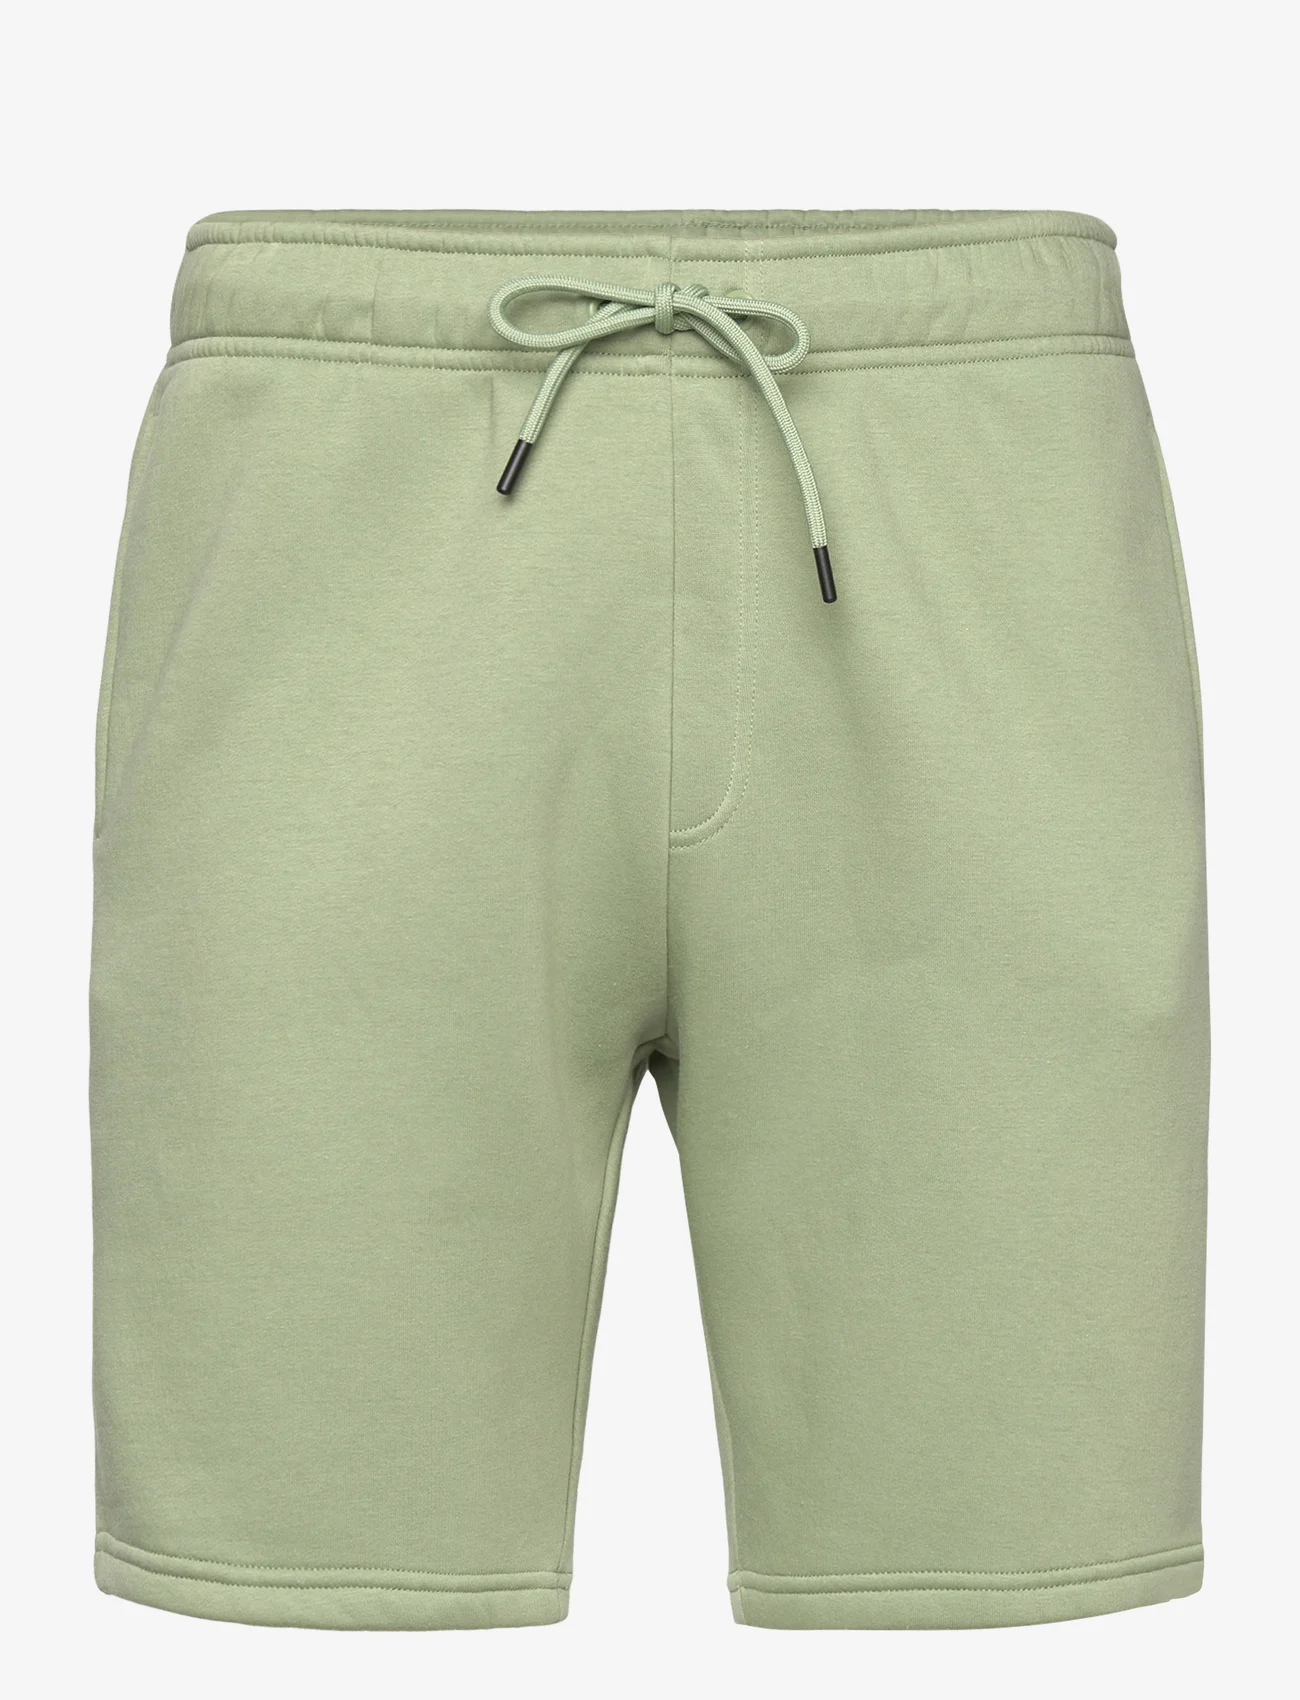 ONLY & SONS - ONSCERES SWEAT SHORTS - lowest prices - hedge green - 0